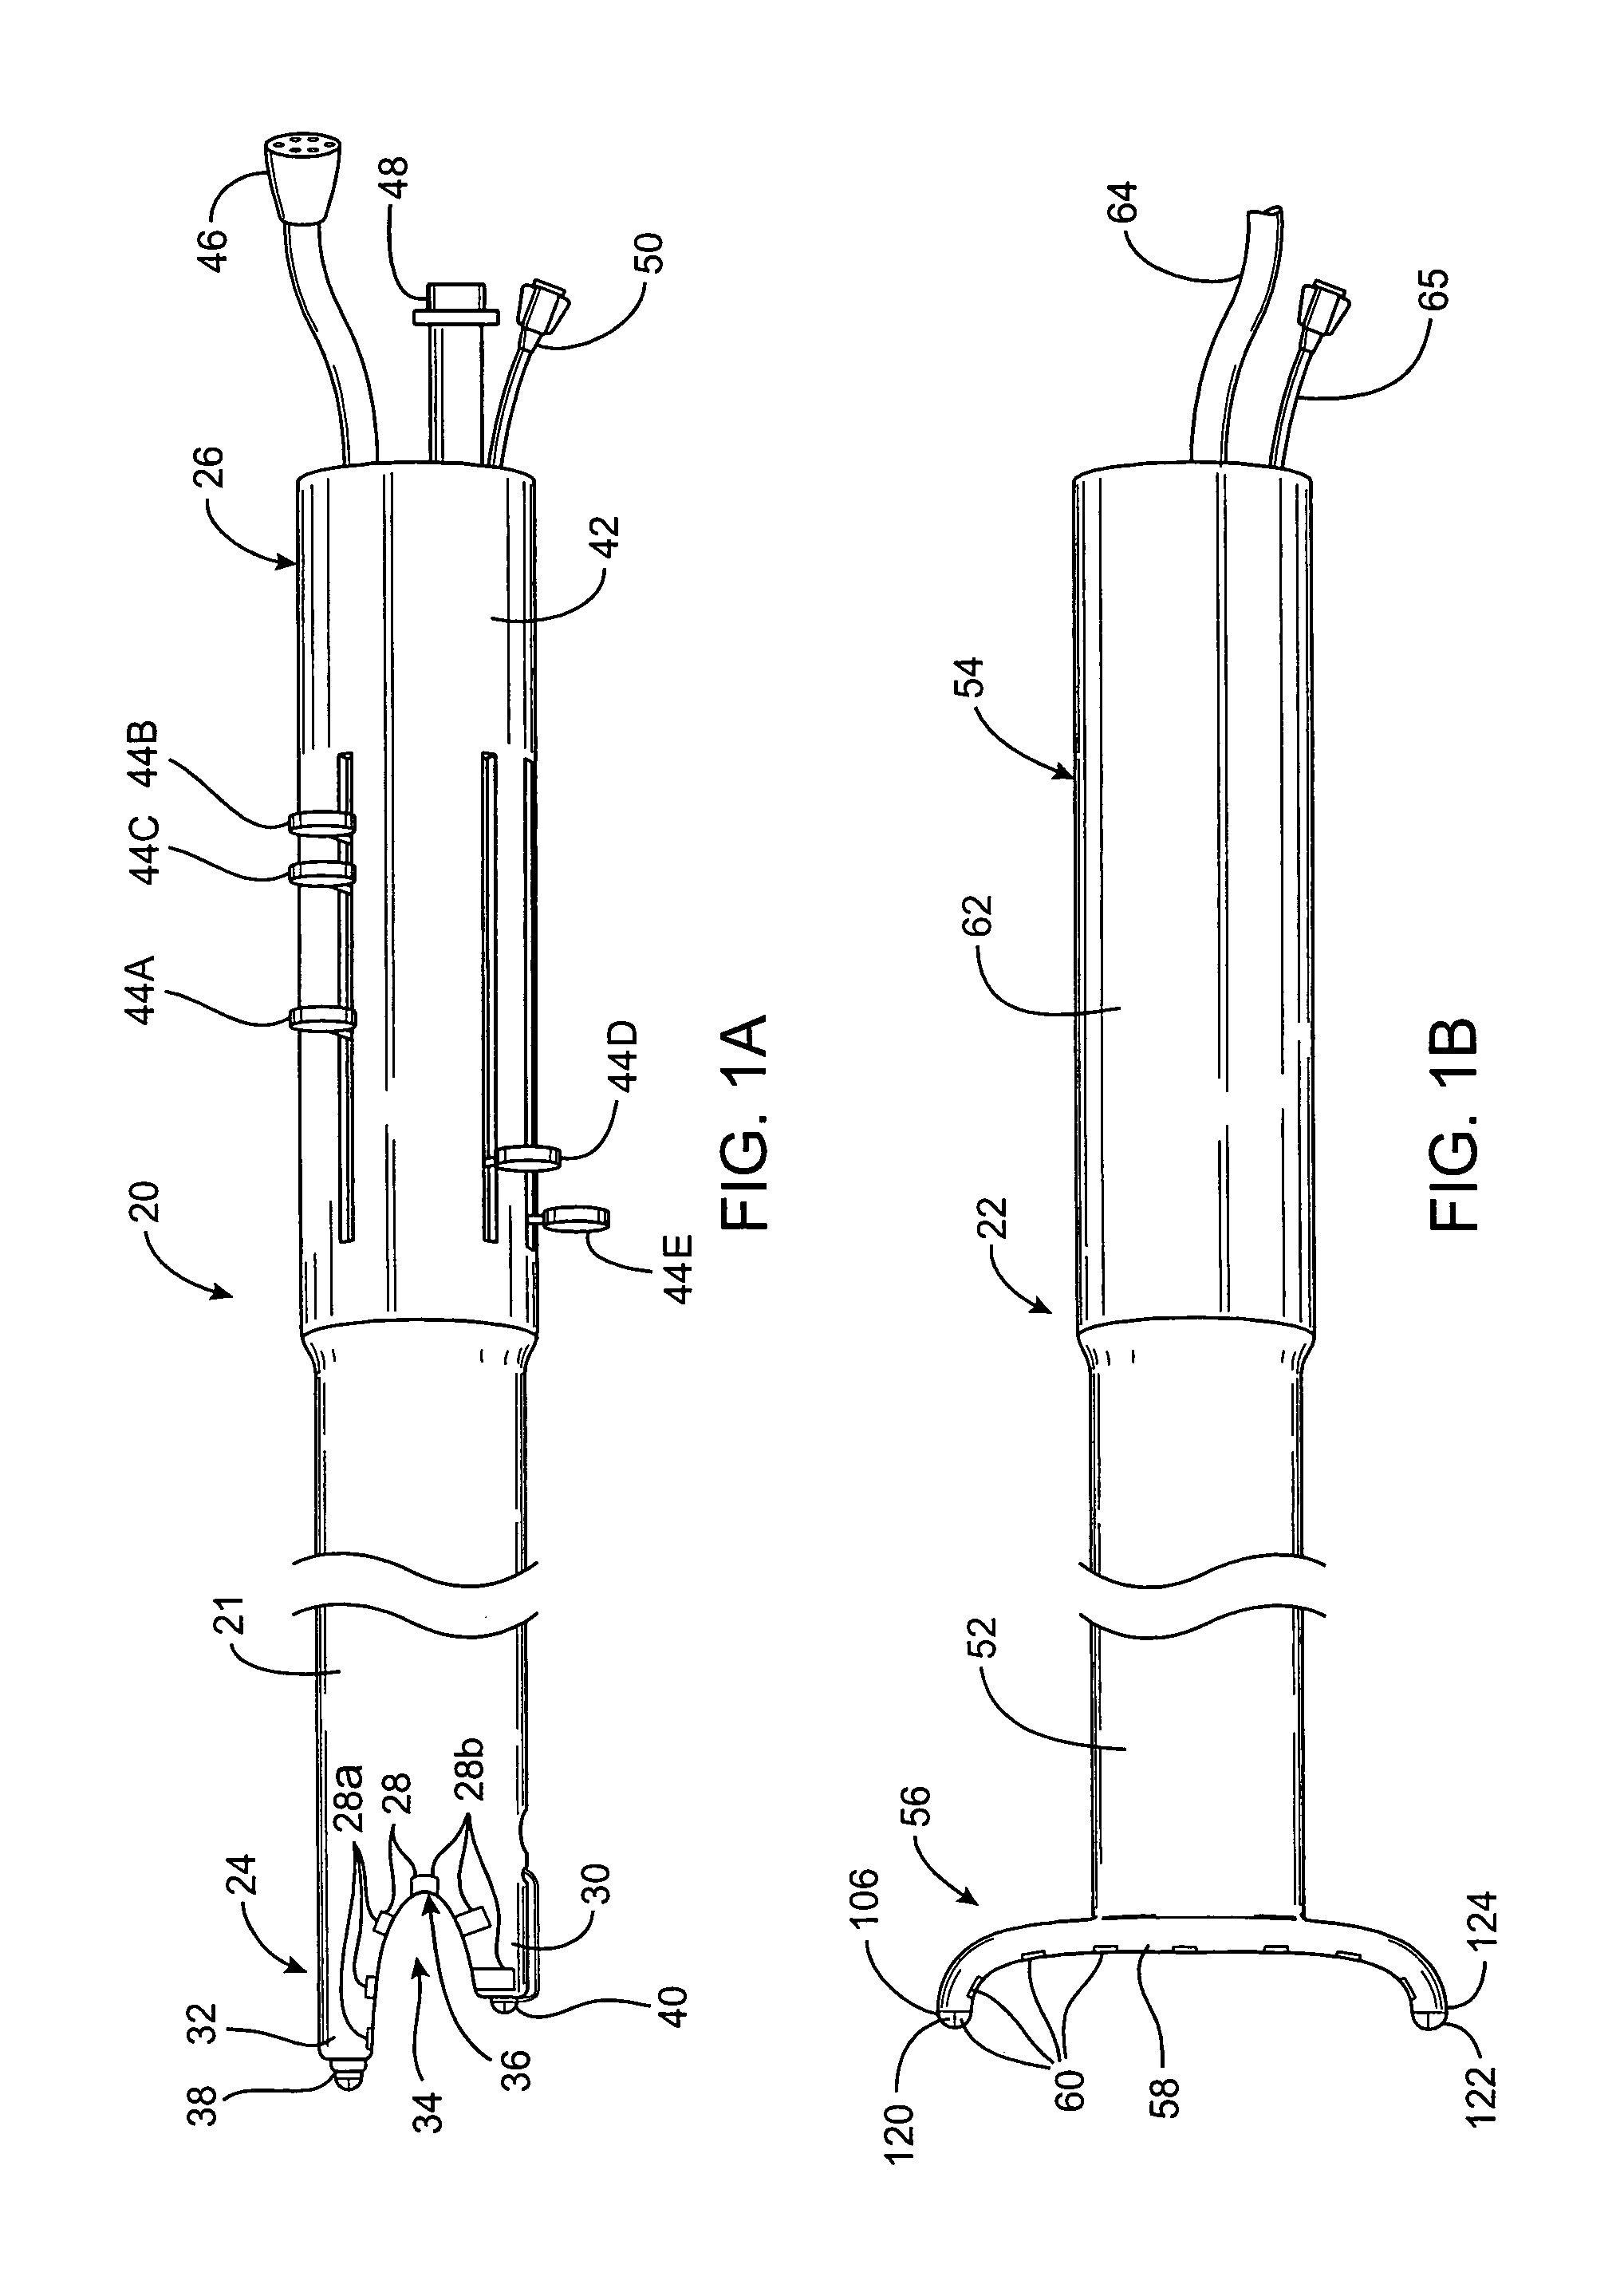 Methods and devices for ablation